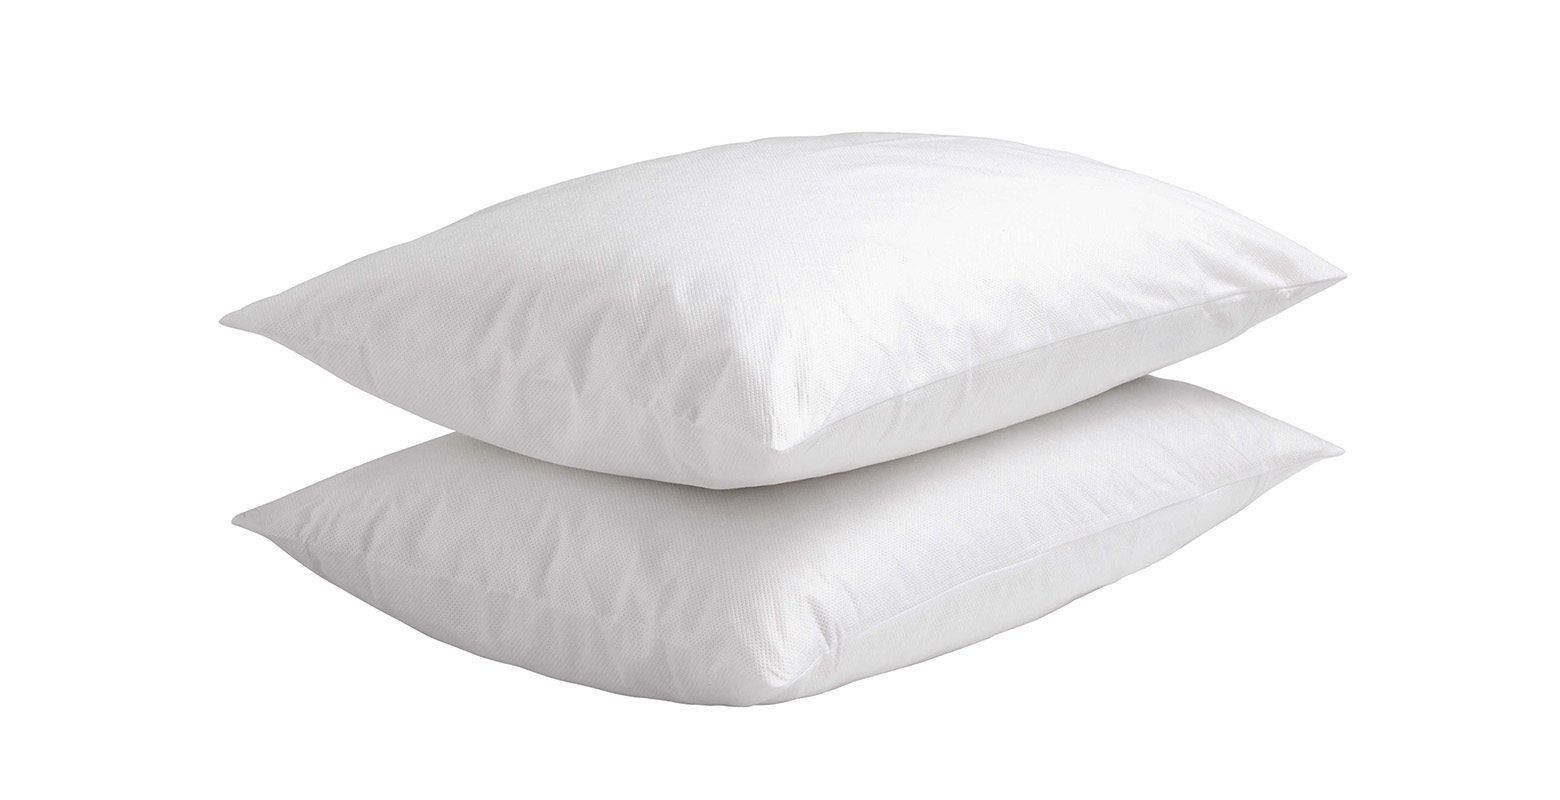 V/015481 - Martex Health & Wellness Anti-Allergy Polypropelene Fully Enclosed Pillow Protector – Pair